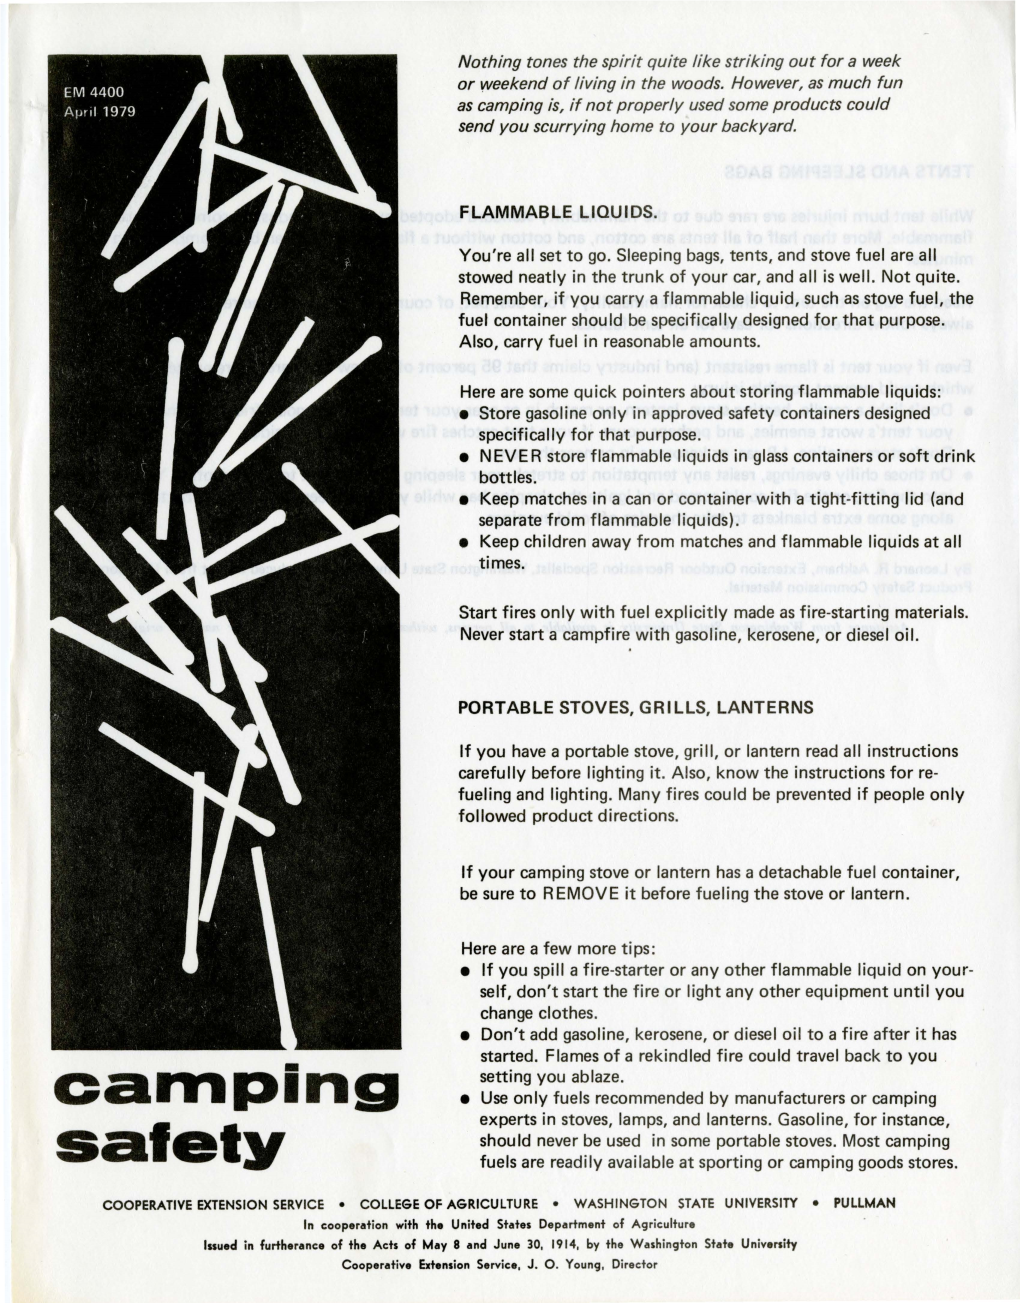 Camping Safety Fuels Are Readily Available at Sporting Or Camping Goods Stores